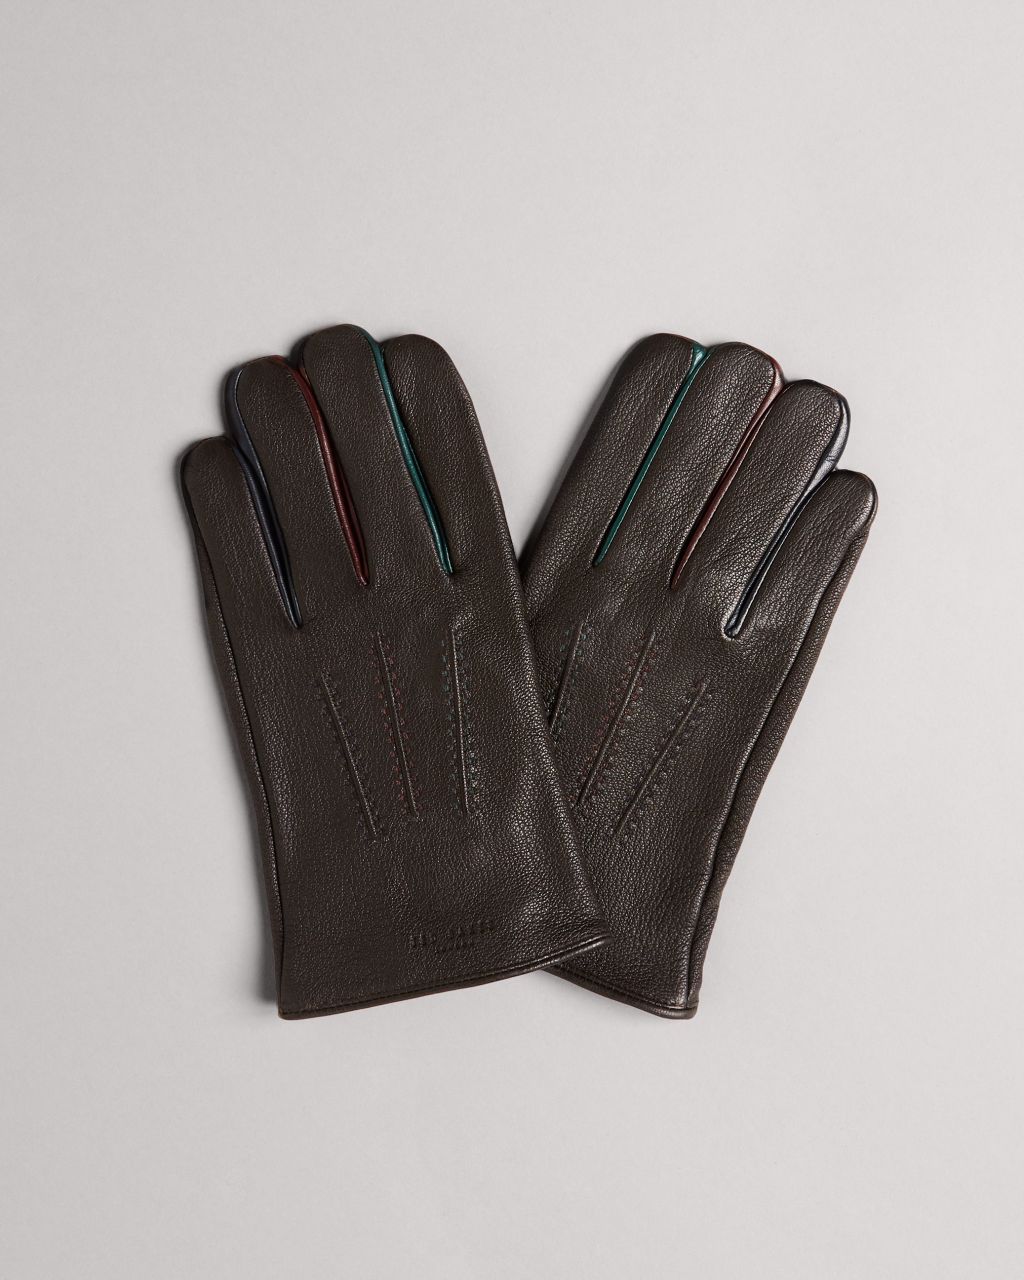 Ted Baker Men's Leather Gloves in Brown-Chocolate, Parmed